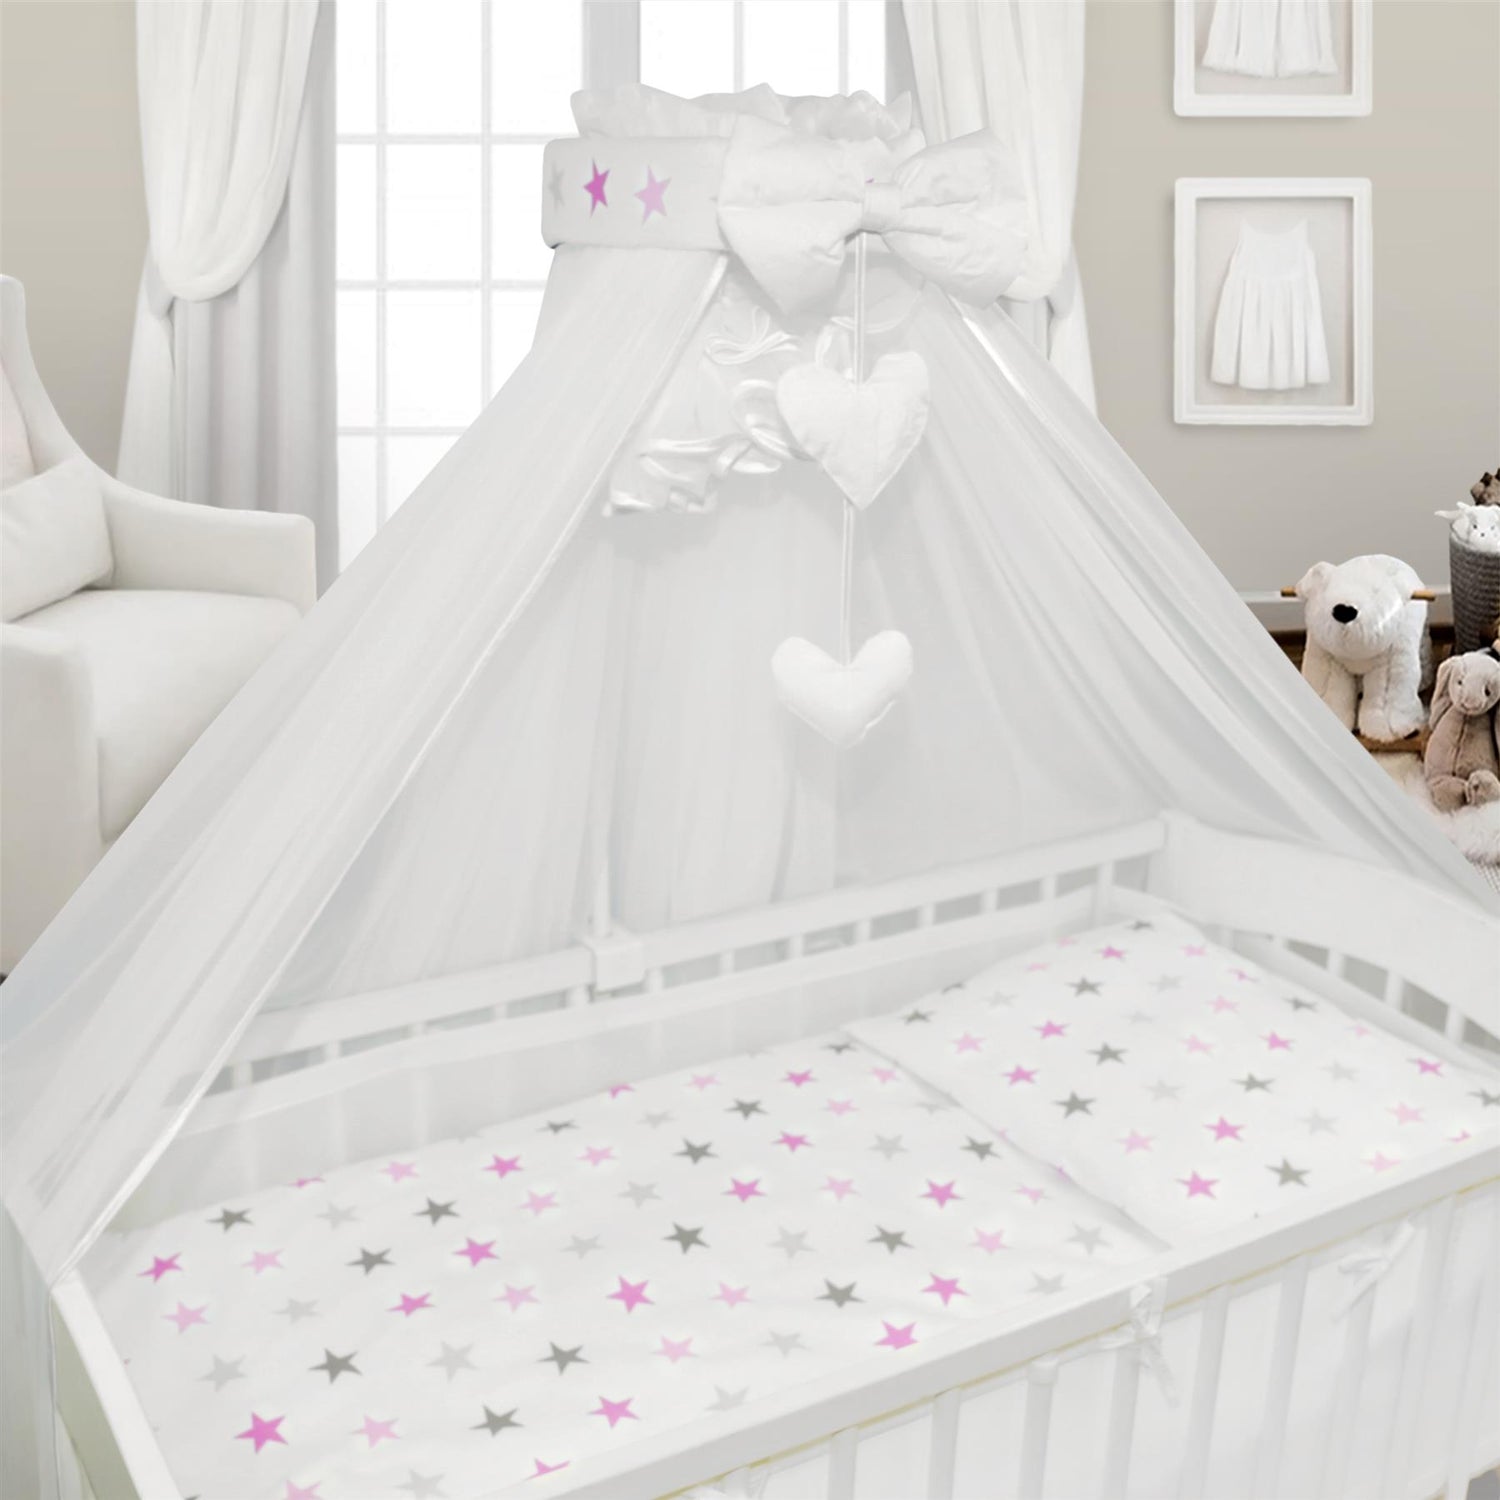 Baby Cot Bedding Set 9pc Fit Cot 120x60cm Pink Grey Stars